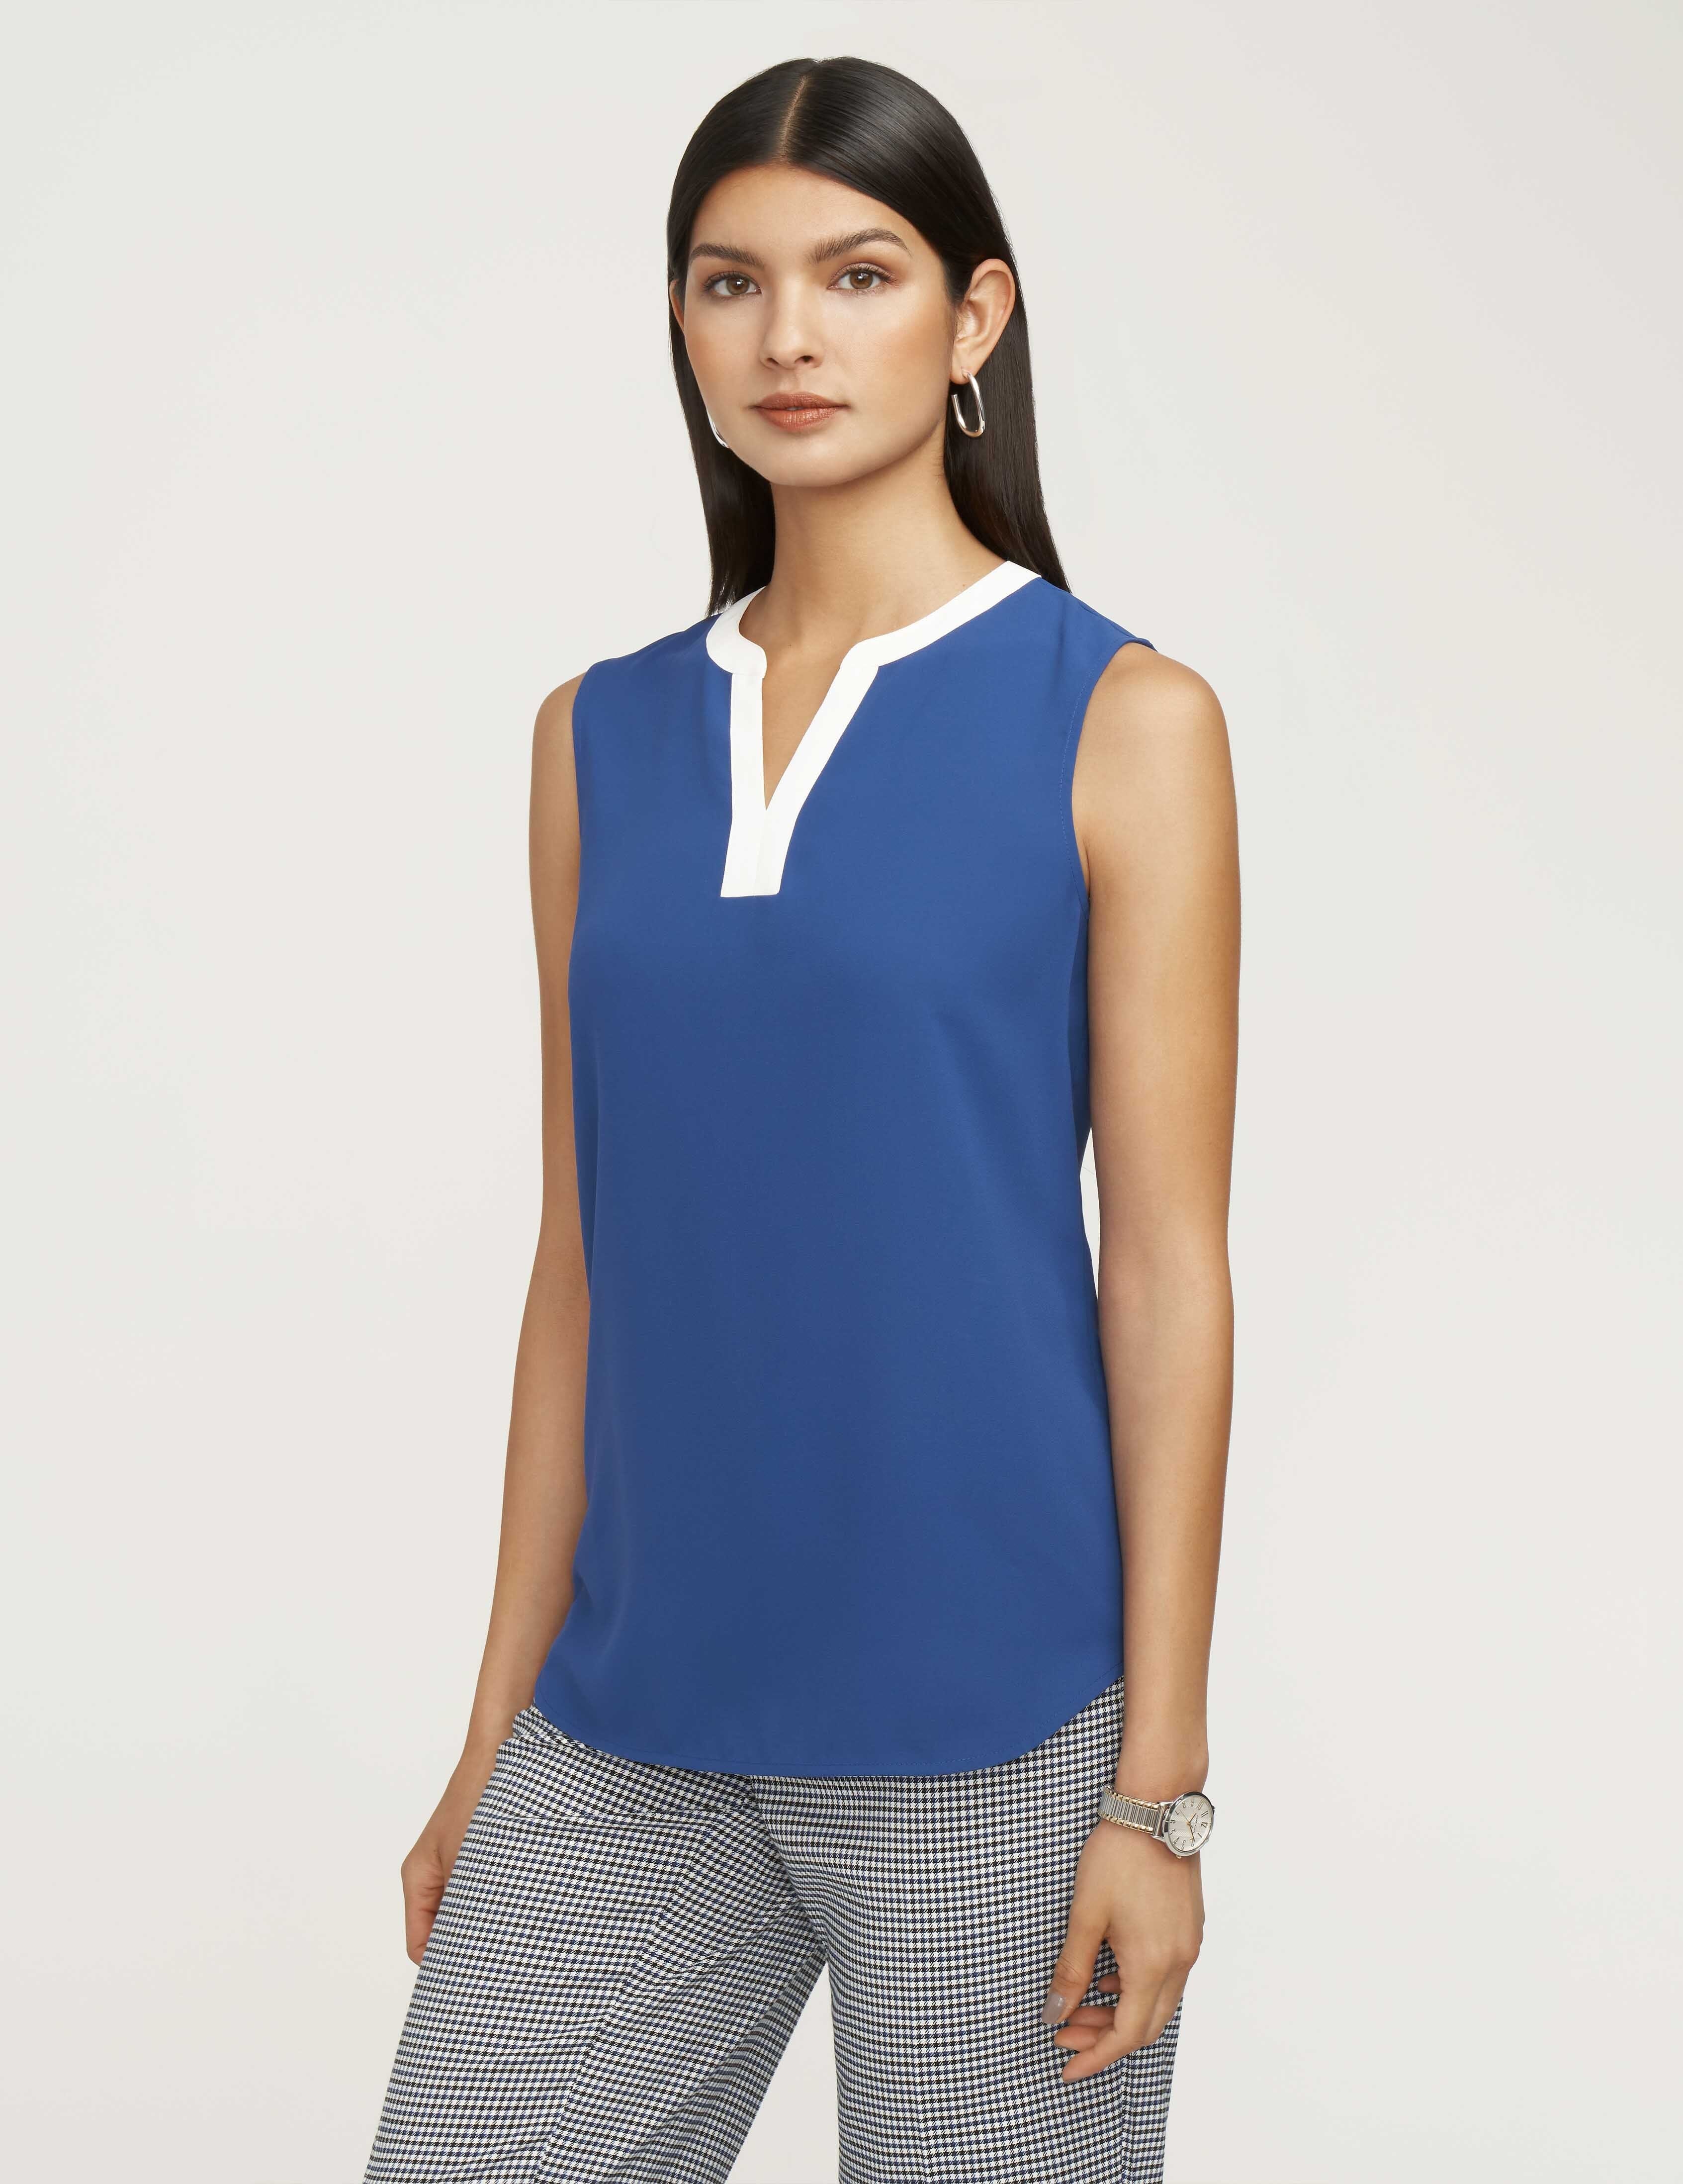 Anne Klein Women's Color Block Split Sleeveless Blouse- Clearance in Magritte Blue/NYC White size Small